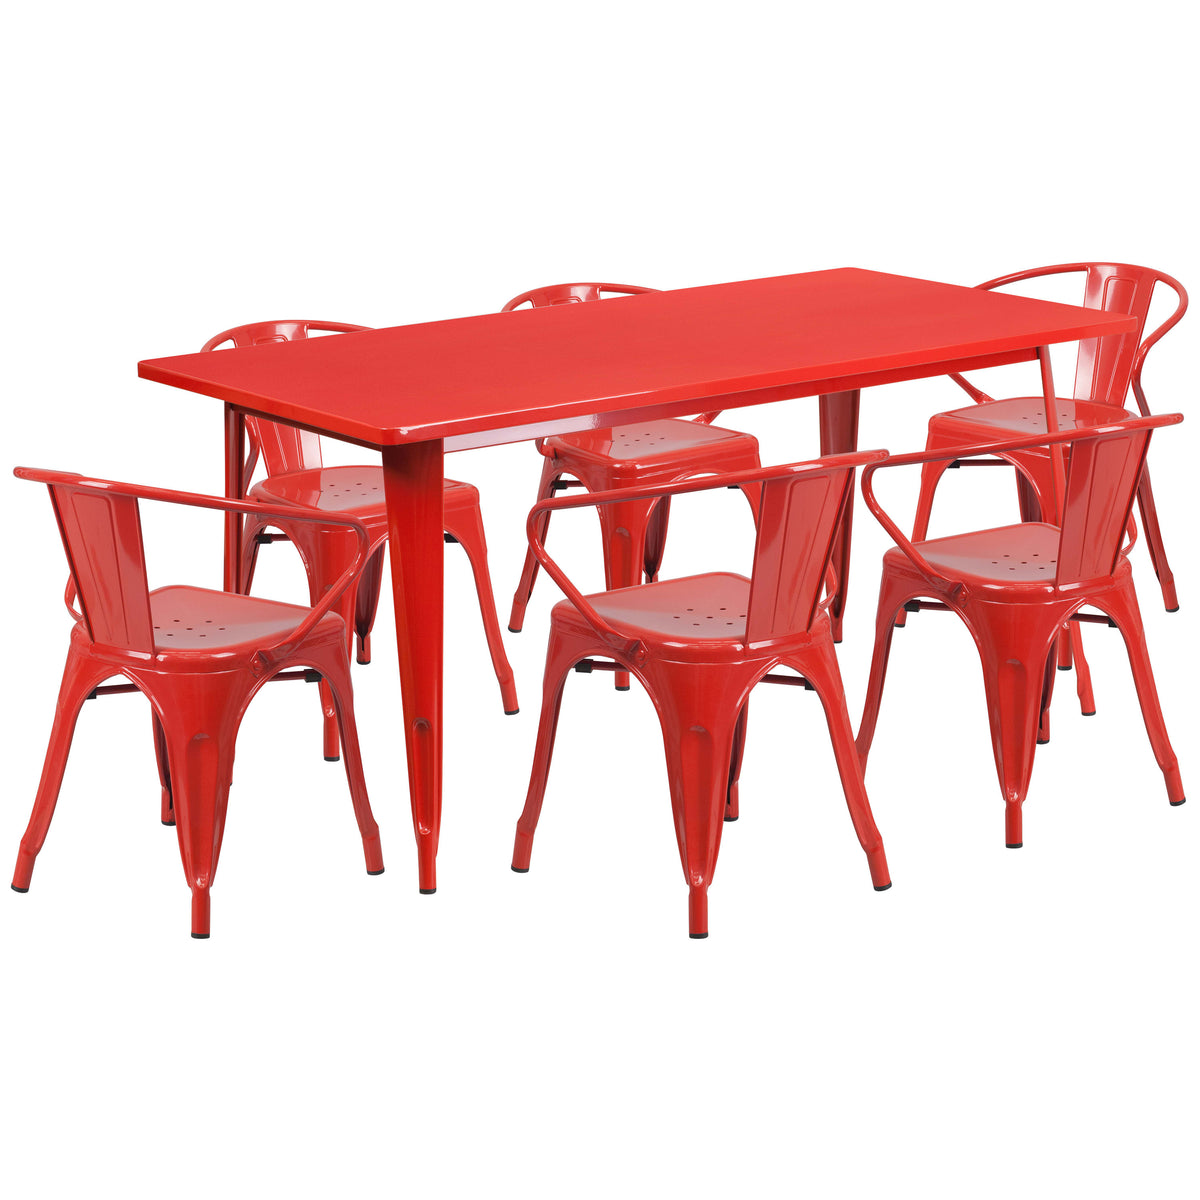 Red |#| 31.5inch x 63inch Rectangular Red Metal Indoor-Outdoor Table Set with 6 Arm Chairs